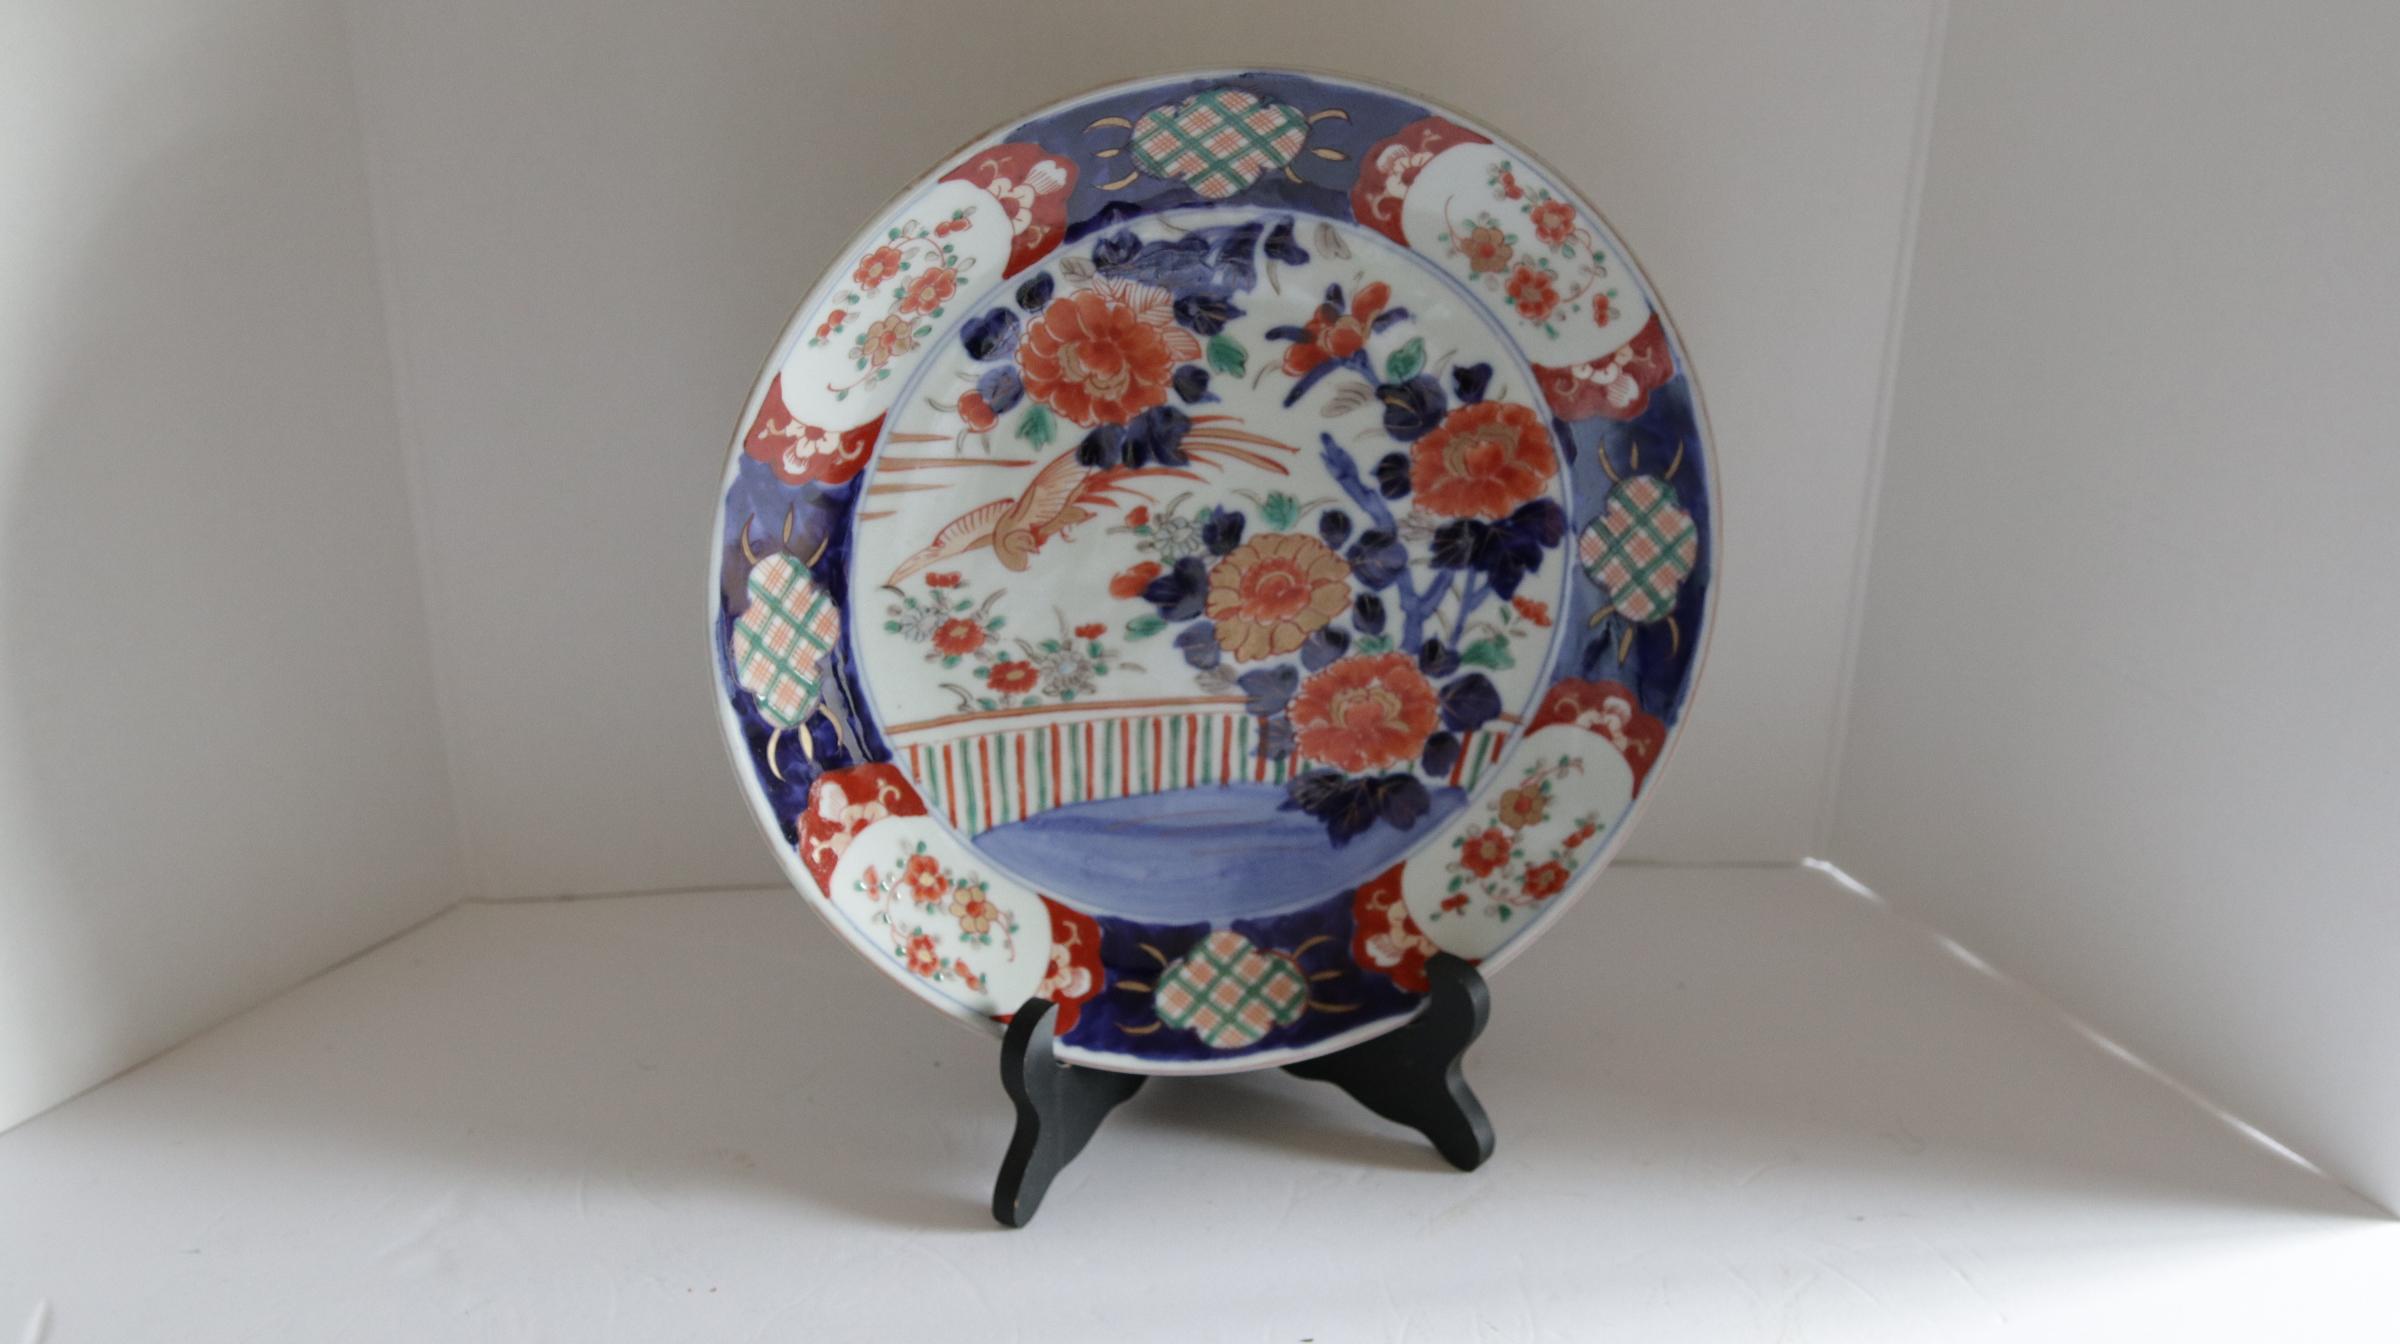 17th Century Orange Blue White Japanese Arita Ware Charger Plate In Good Condition For Sale In Lomita, CA